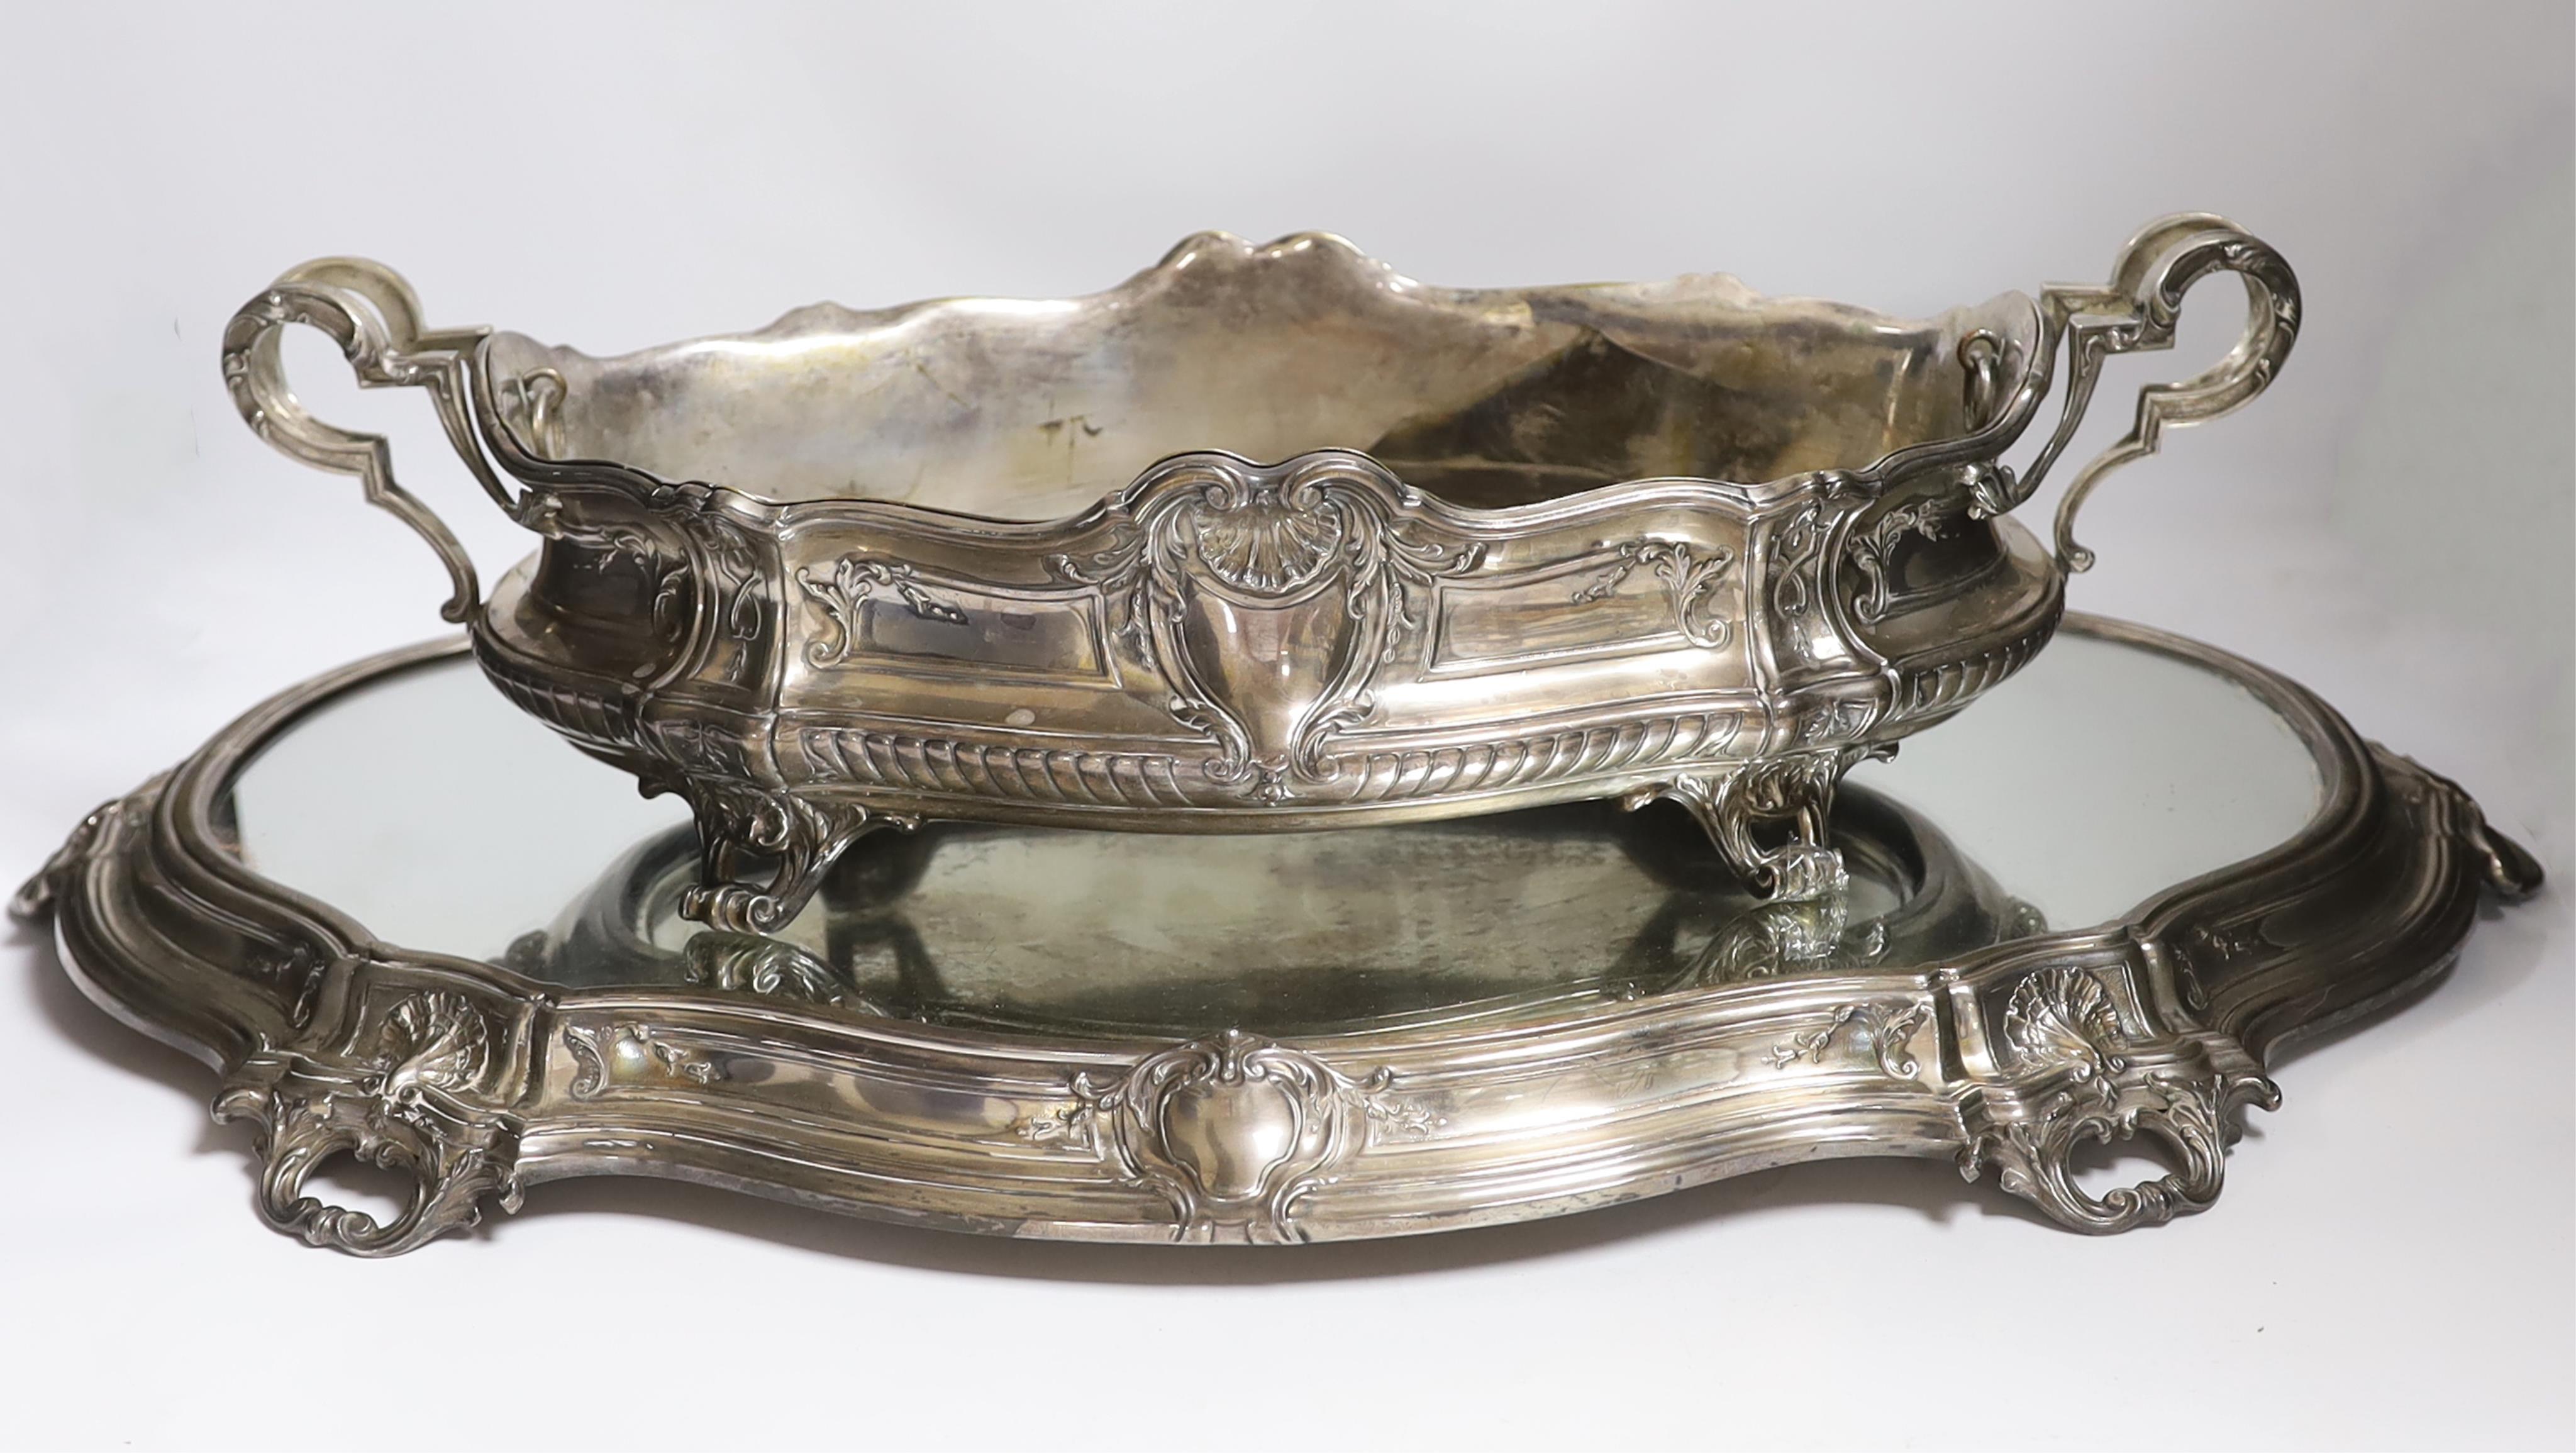 A large ornate Belgian? 800 standard white metal two handled oval centrepiece, 53cm, 46.1oz, with a base metal liner, on a similar 800 standard white metal mounted mirrored stand, 70cm.                                   